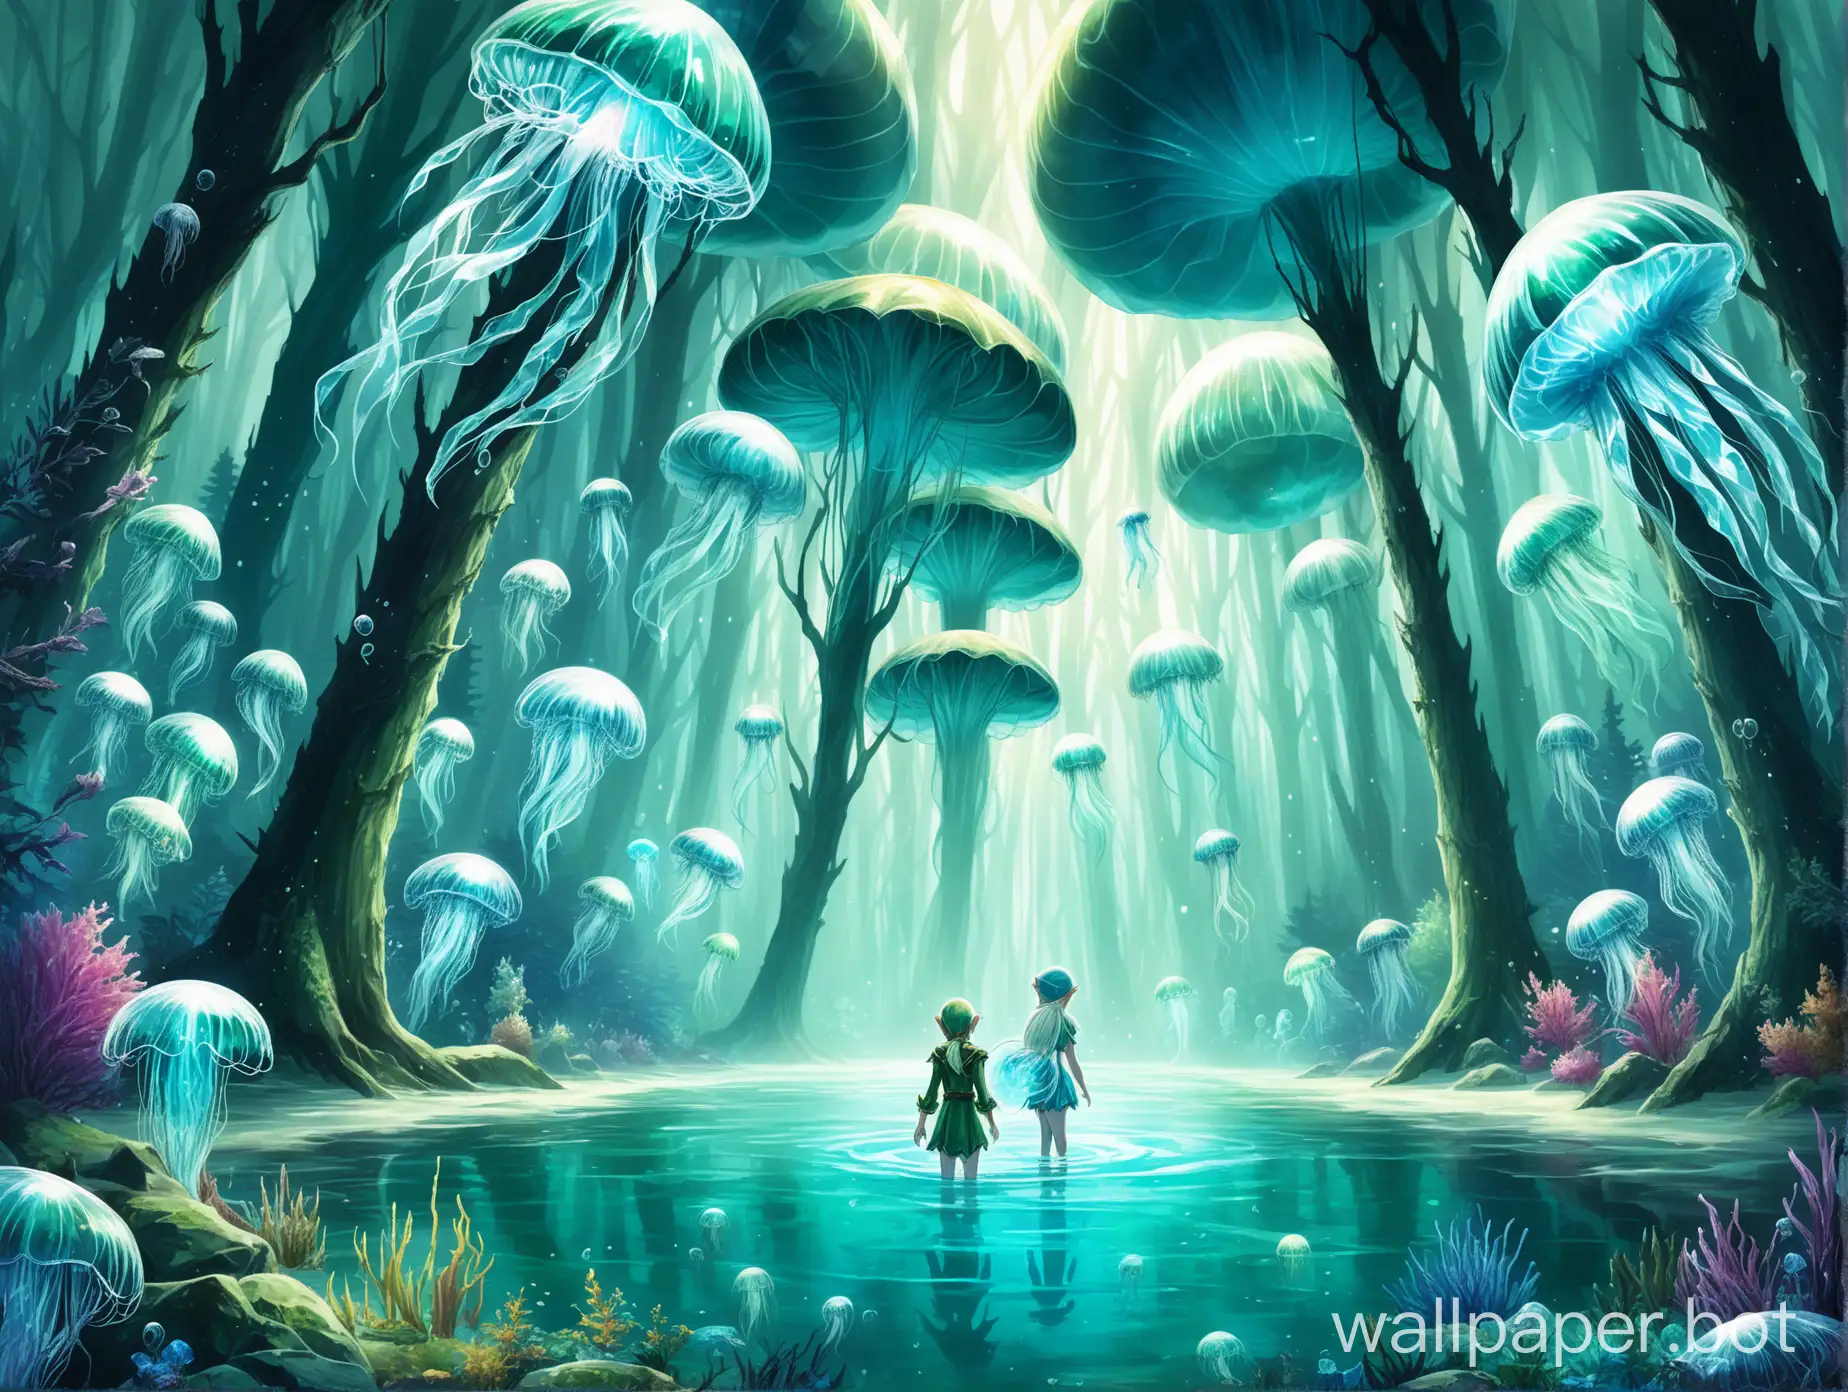 crystal forest with an elf holding a jellyfish in shallow water and trees